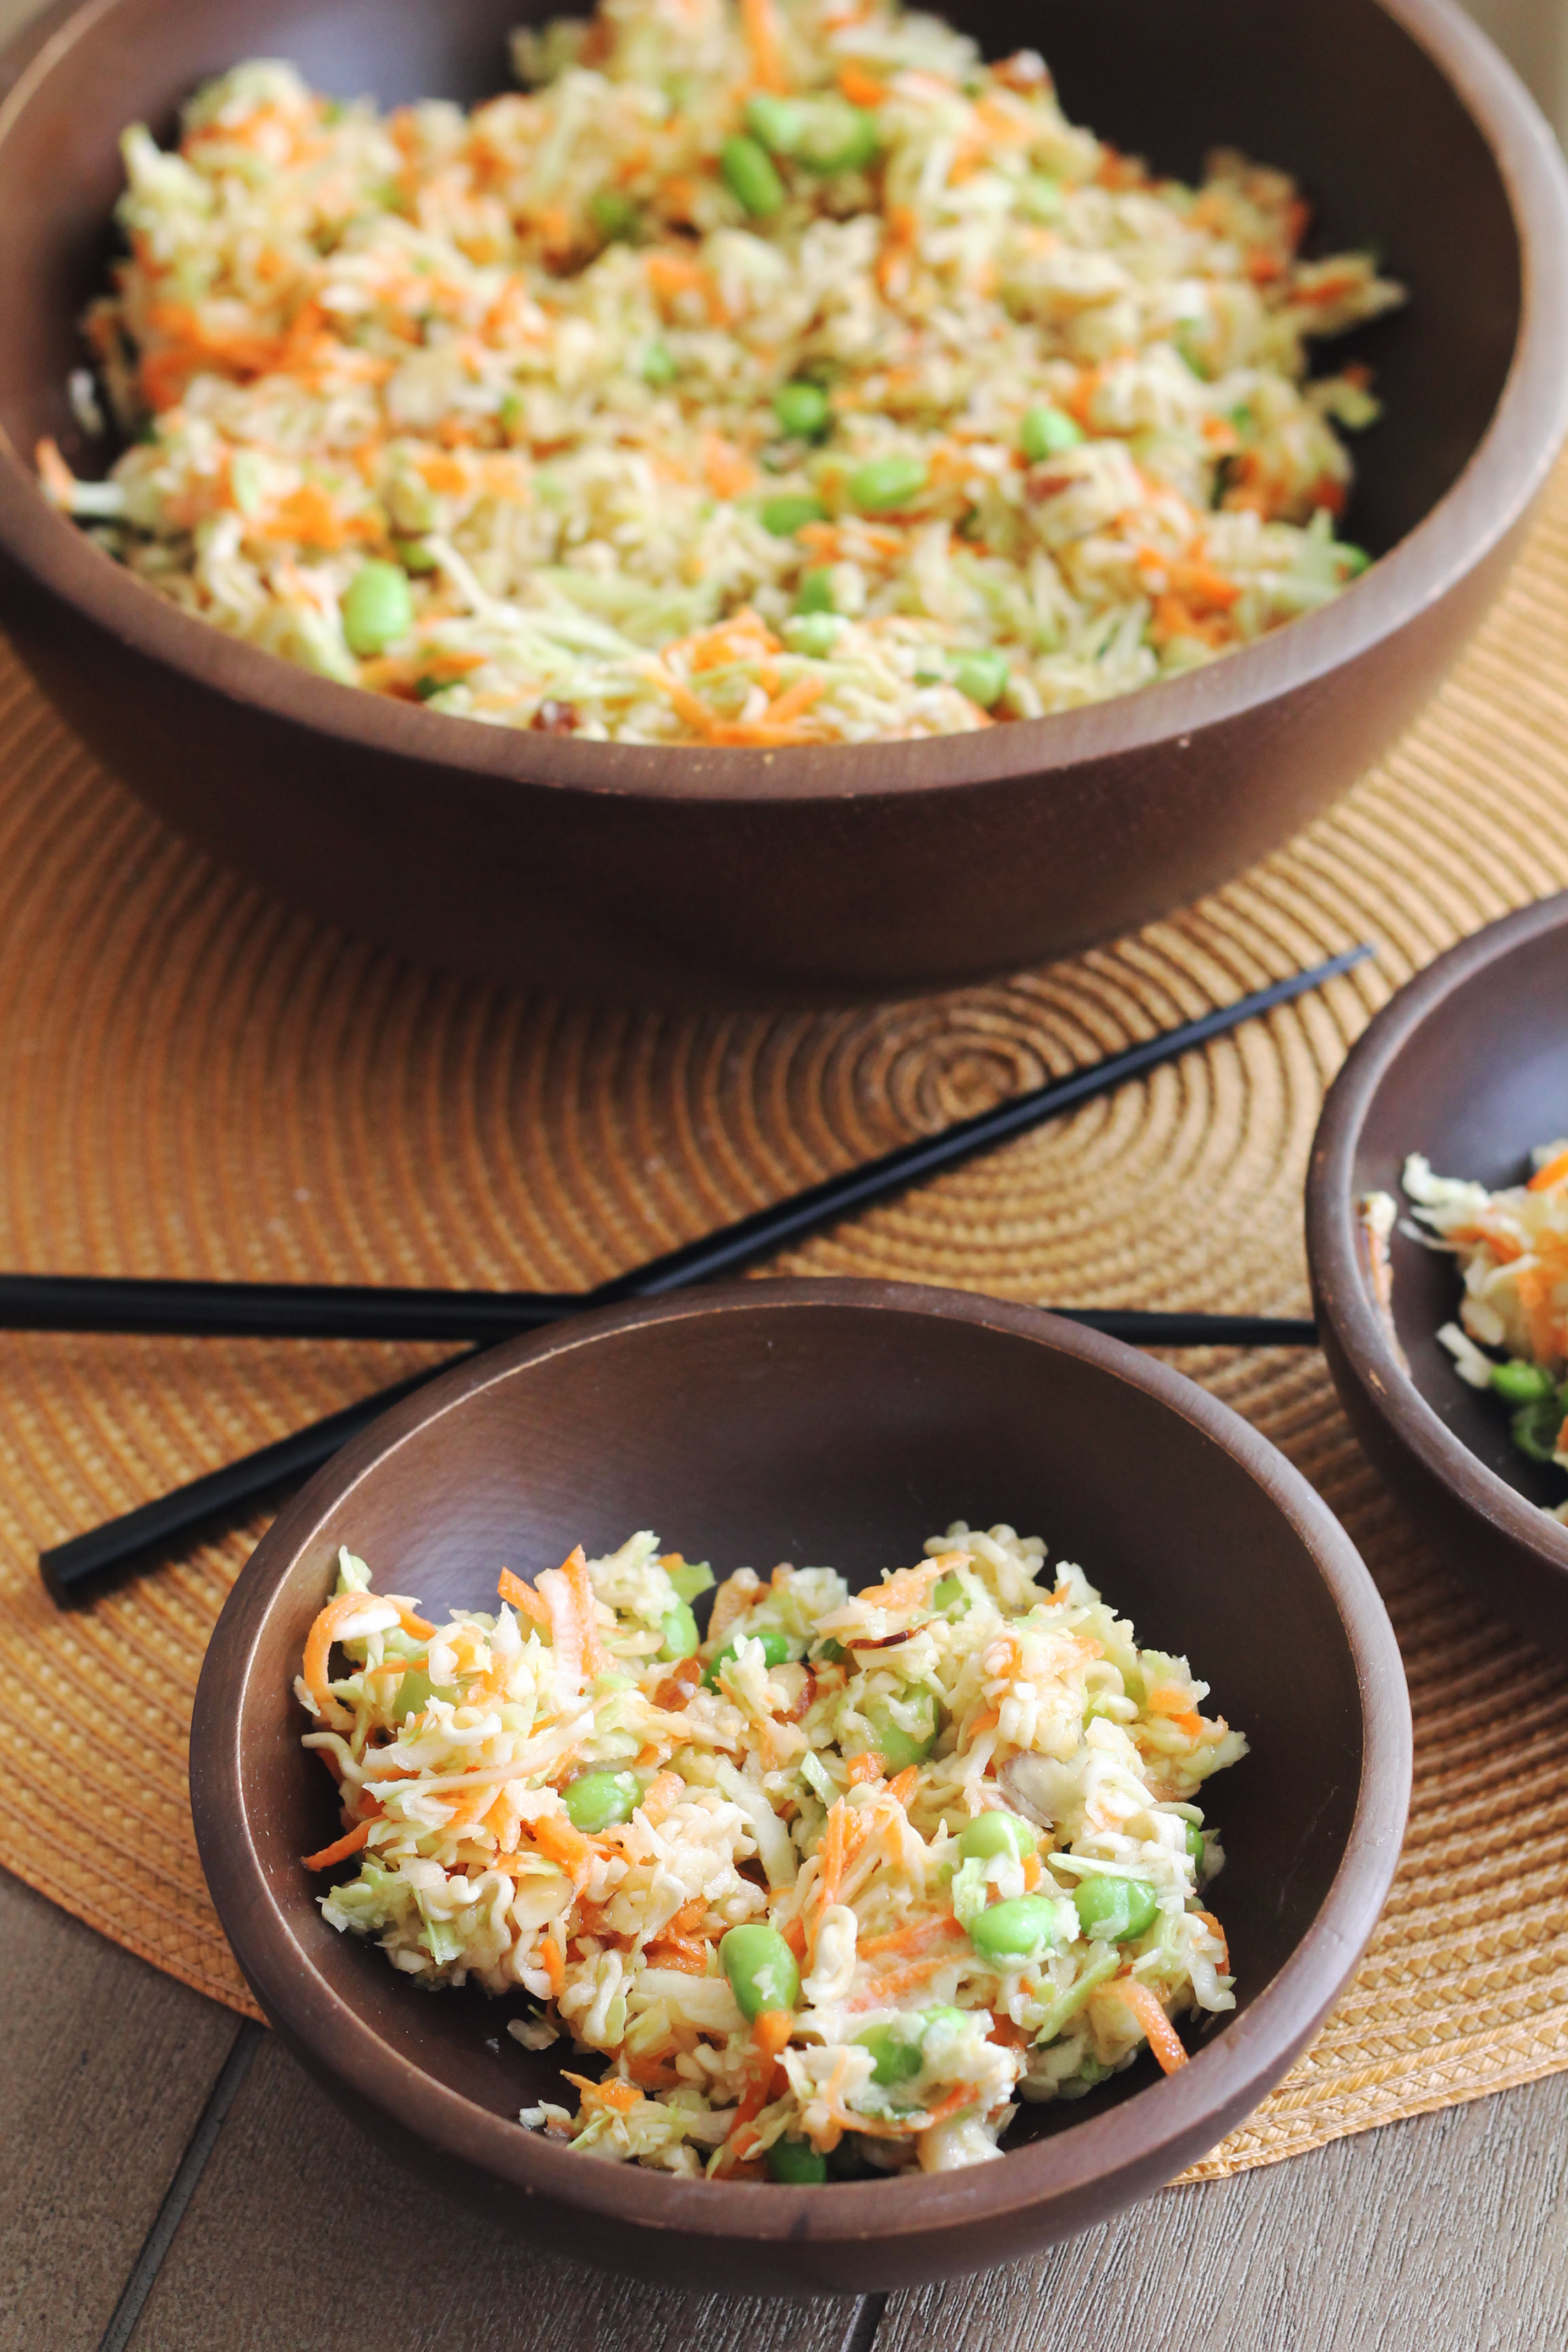 This Asian Slaw is quick, easy and so full of flavor. Perfect for a side dish!